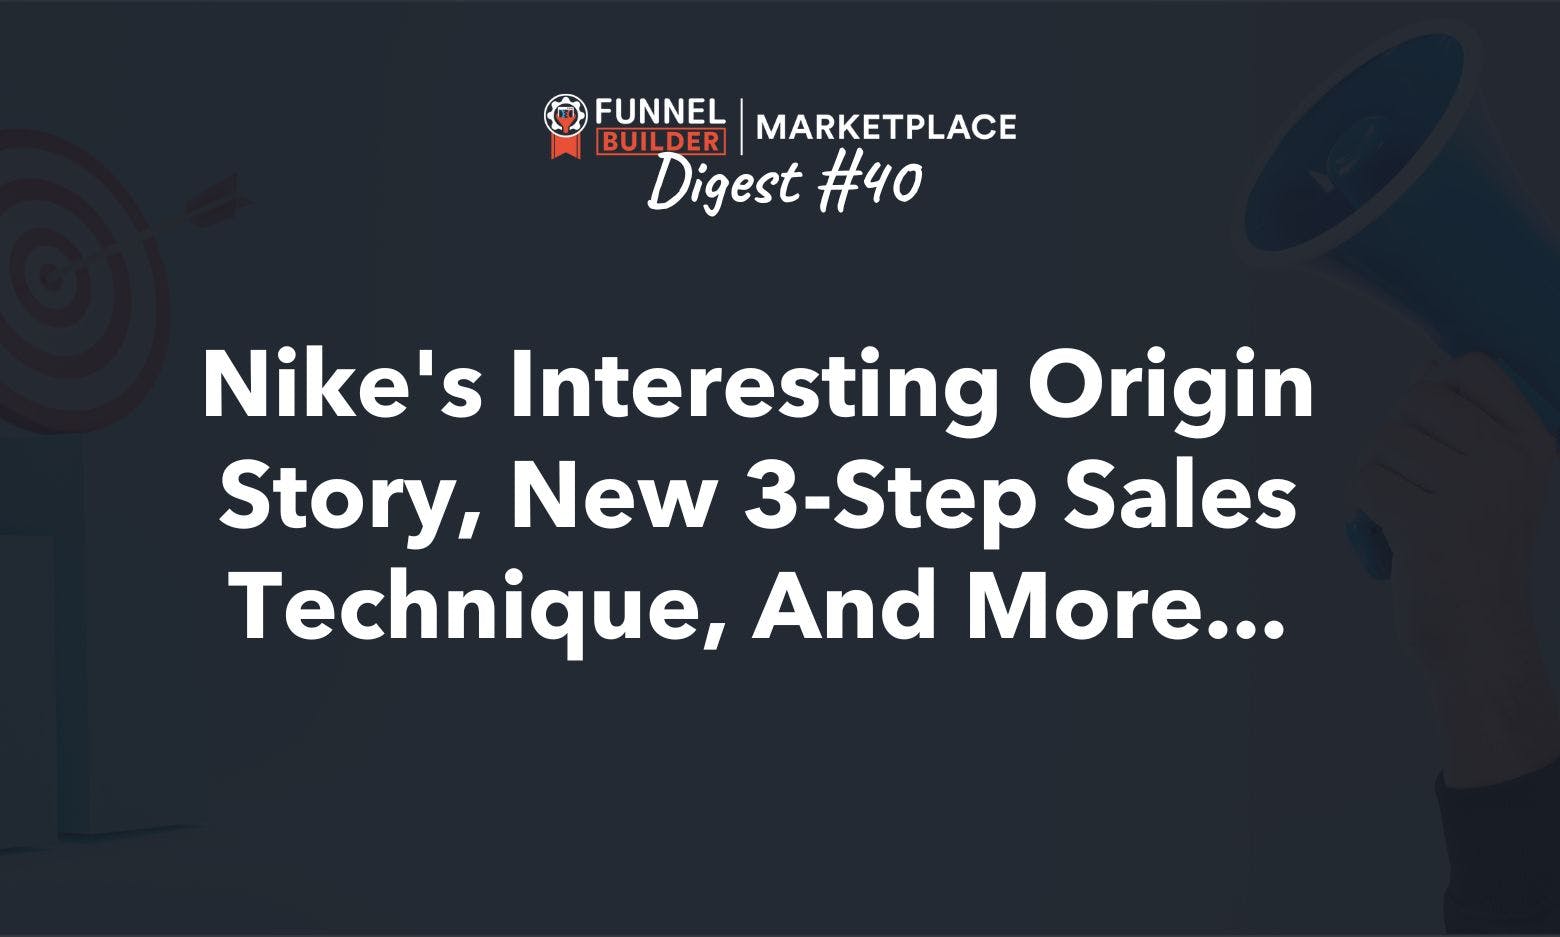 FBM Digest #40: Nike's interesting origin story, new 3-step sales technique, and more... 